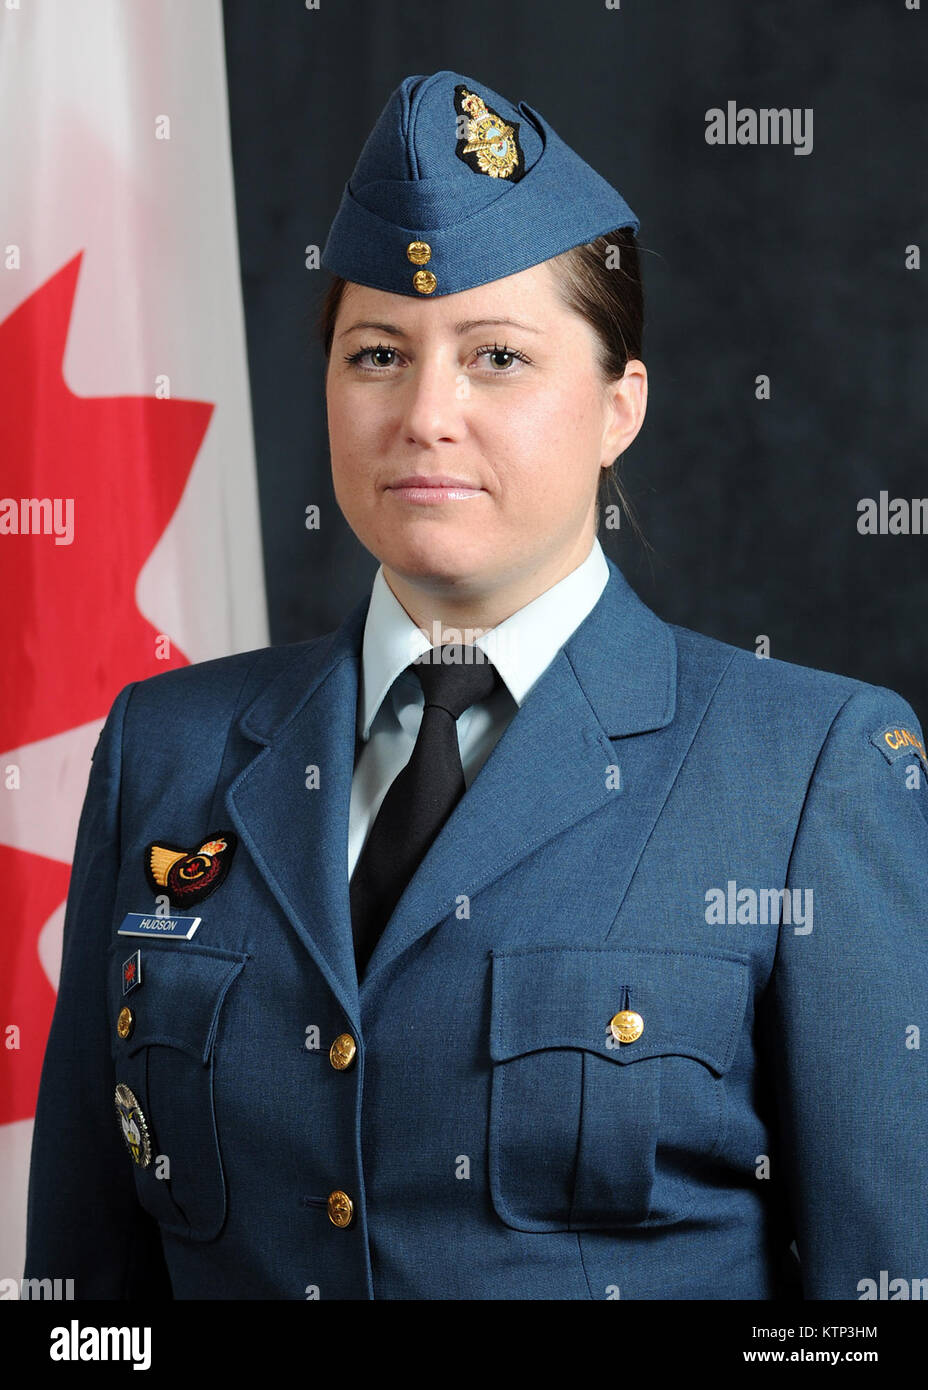 Capt. Angela Hudson, Royal Canadian Air Force, Outstanding Company Grade  Officer. A senior director in operations, Hudson qualified as an instructor  in the shortest time possible. A third-year law student, she was